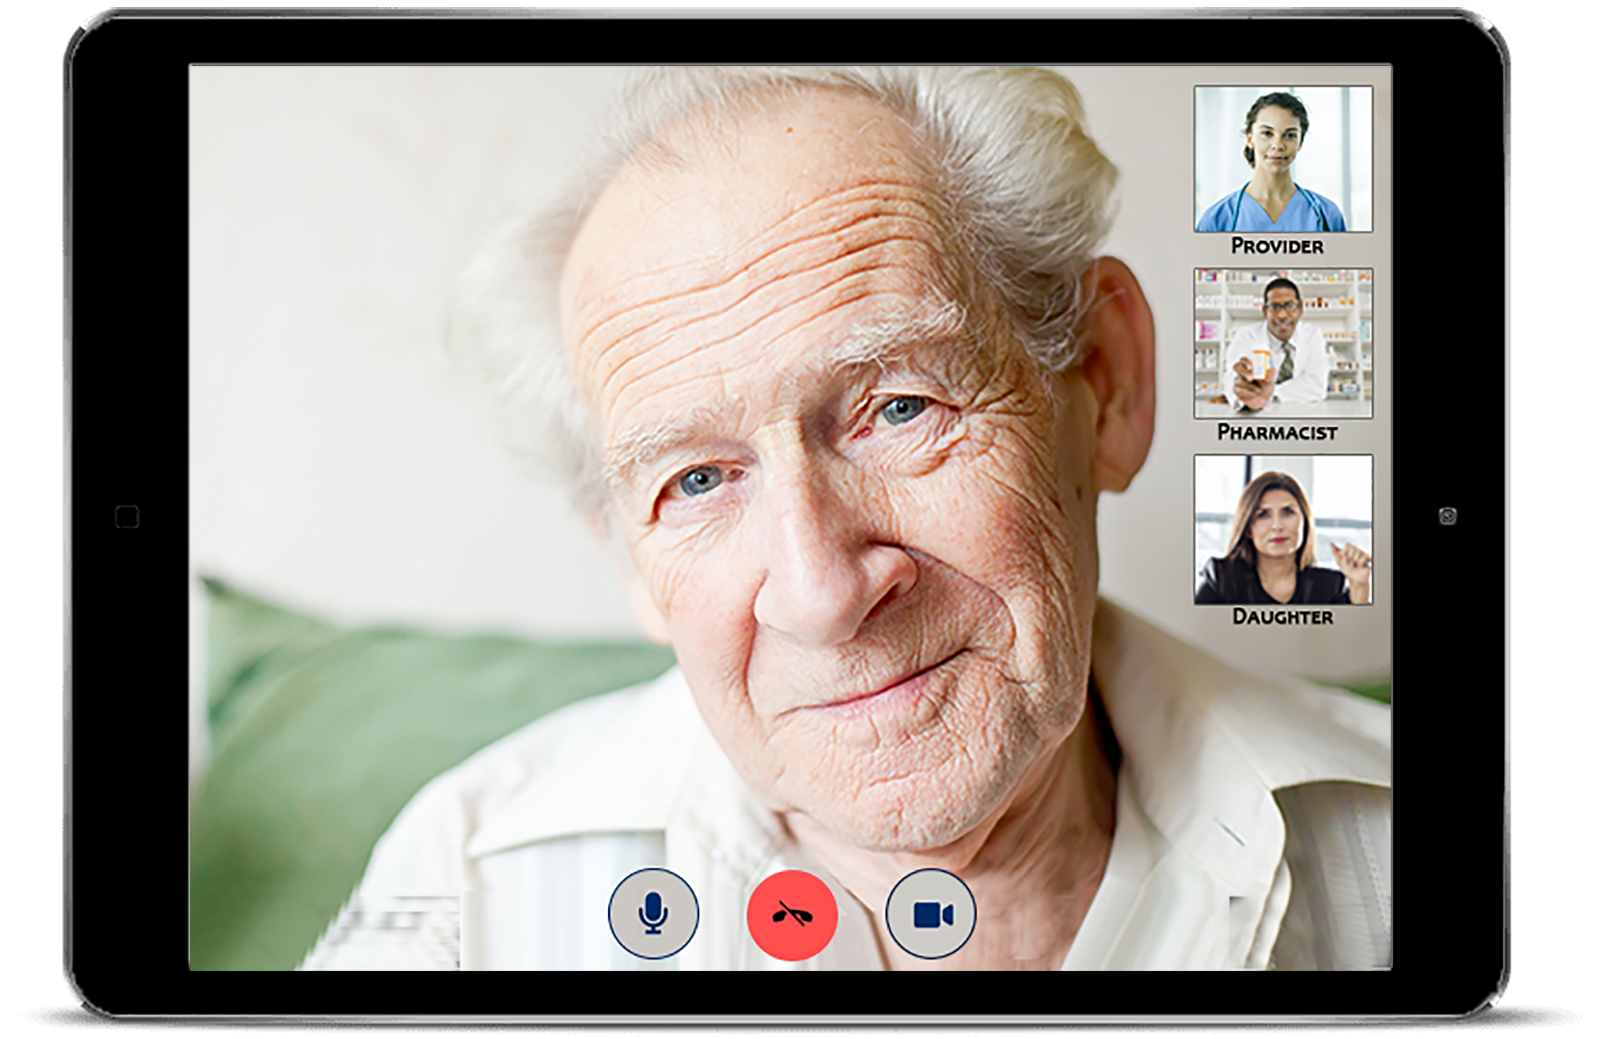 Patient access to providers via video